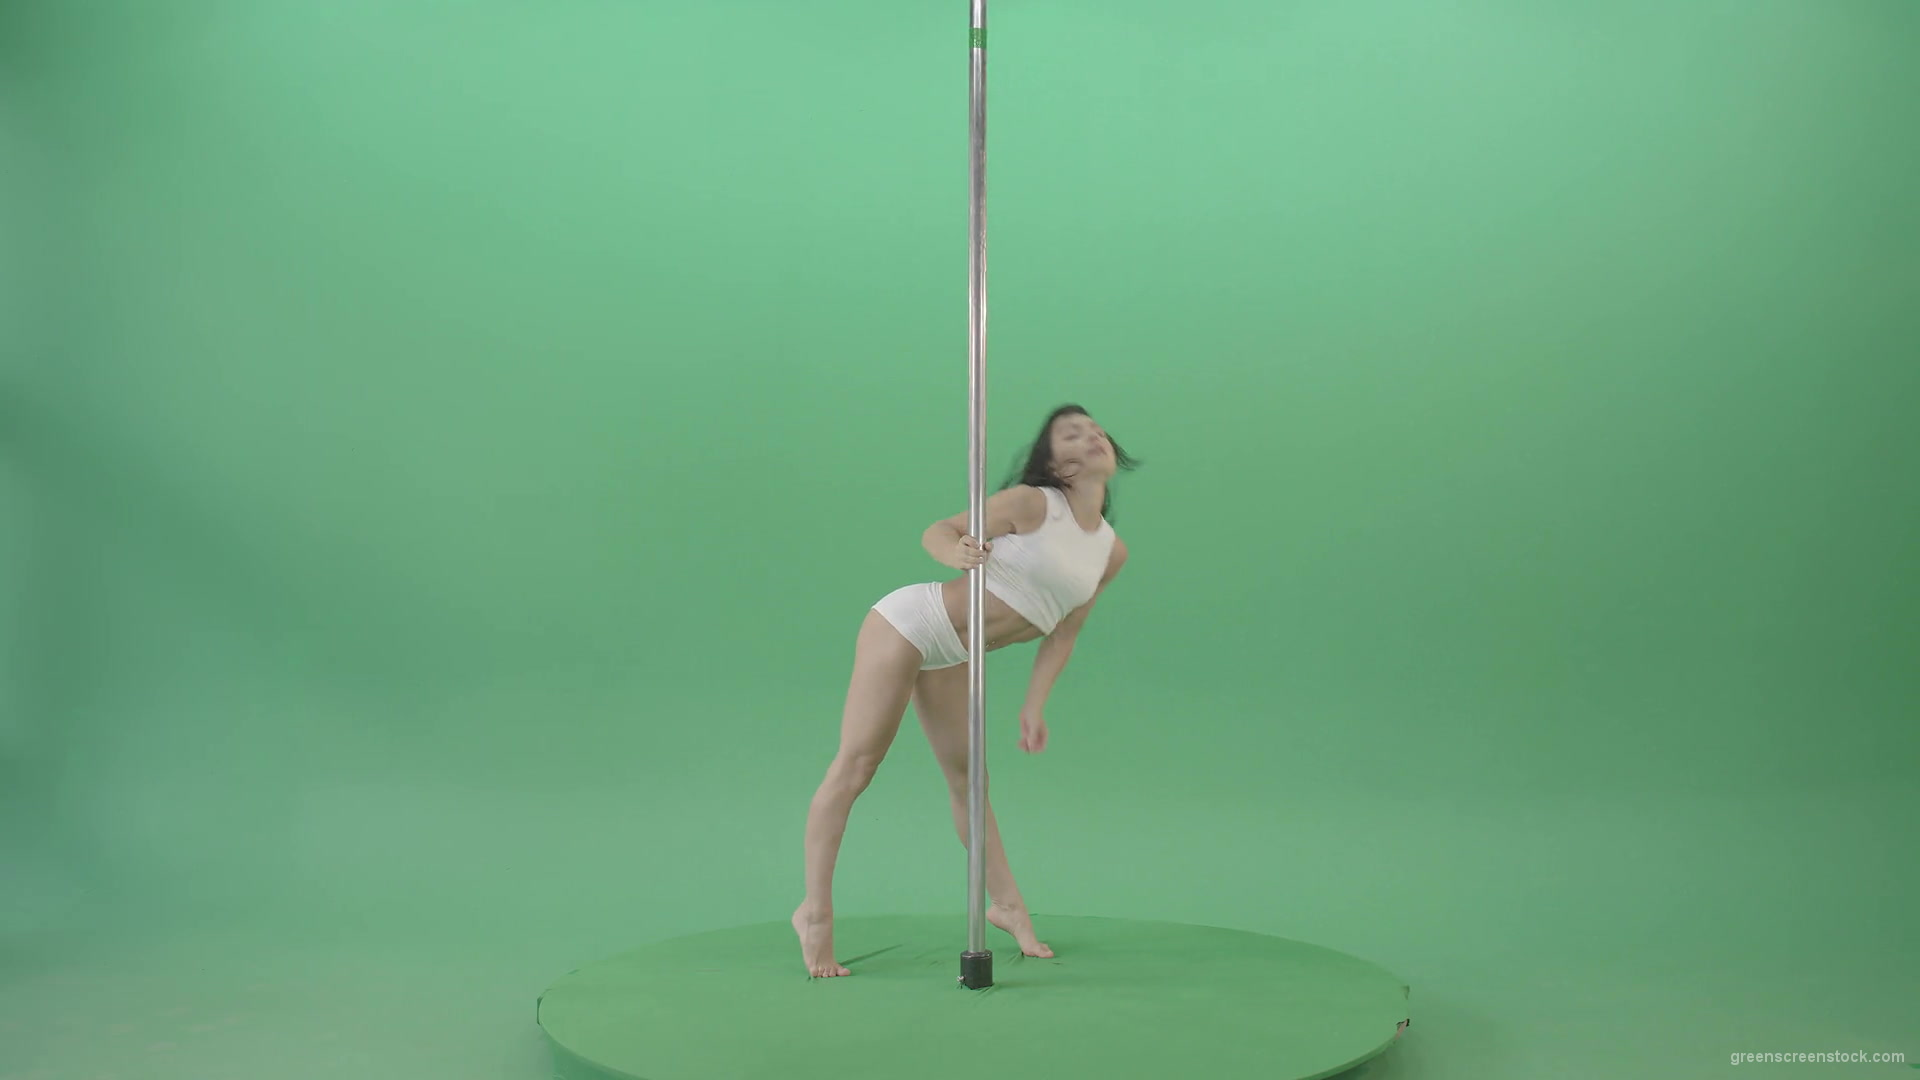 Sexy-moves-by-pole-dance-girl-dancing-on-green-screen-Video-Footage-1920_009 Green Screen Stock